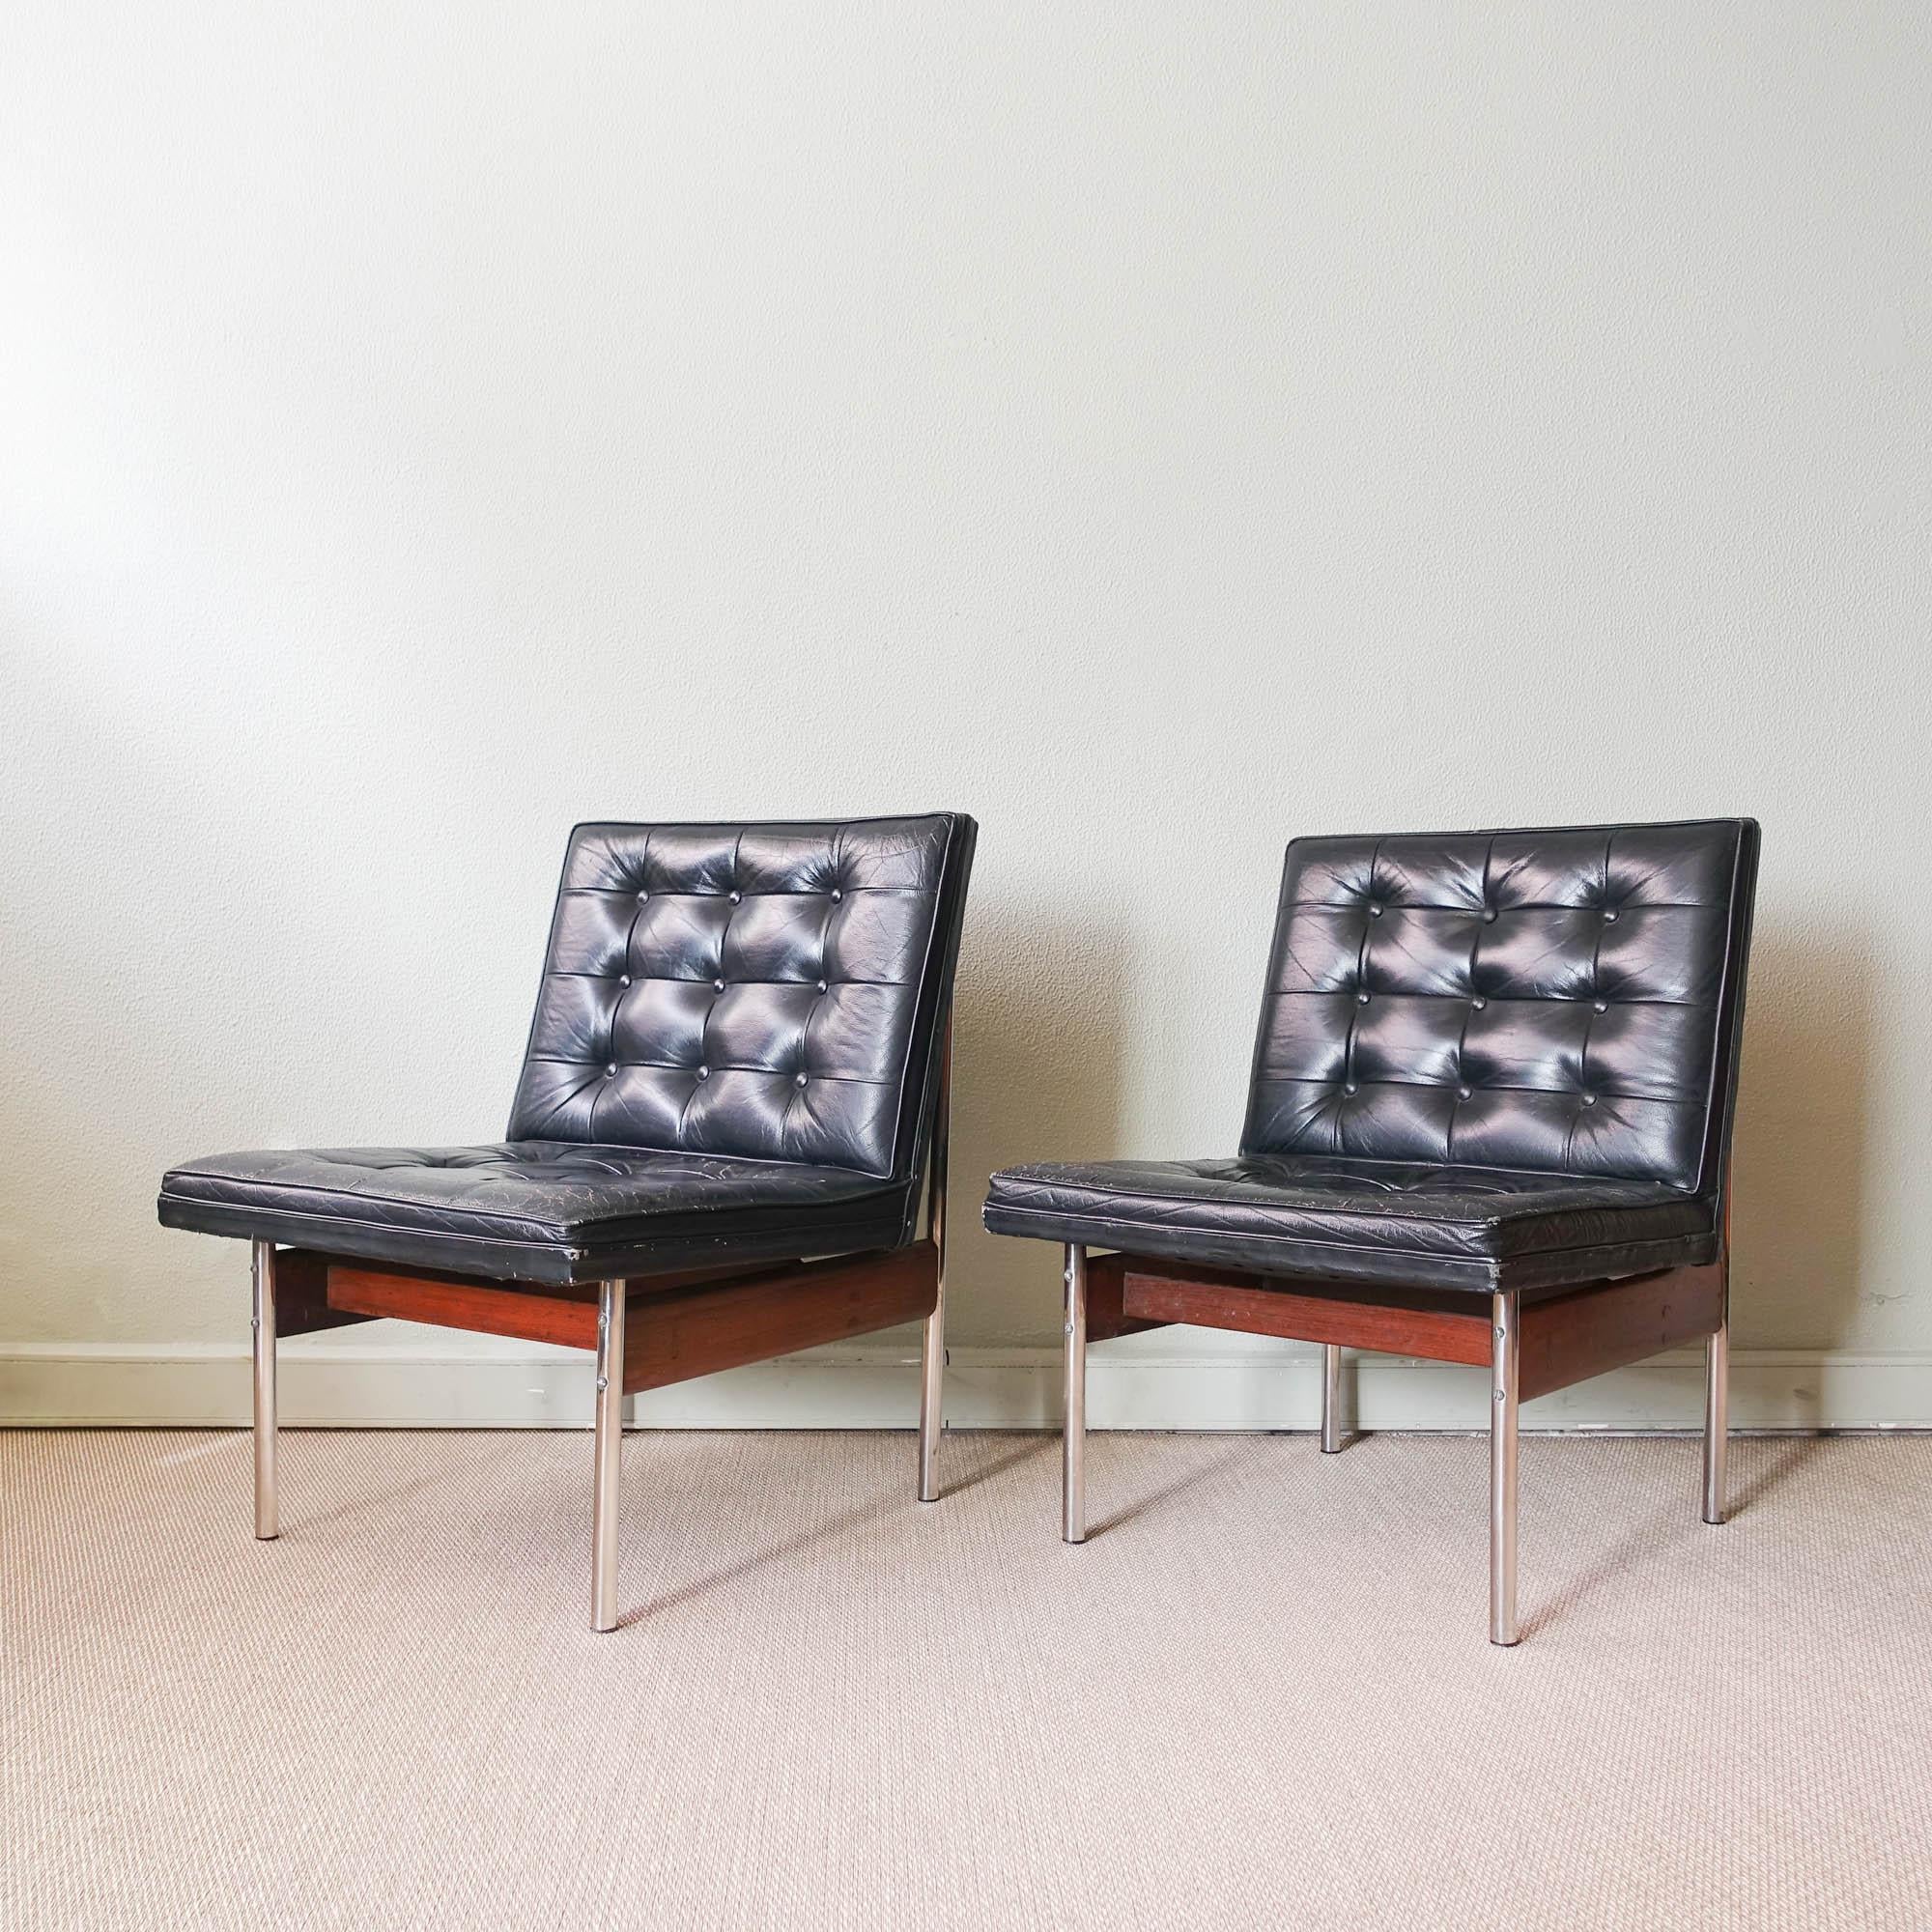 Step into the vibrant world of 1970s Brazilian design with this exquisite pair of lounge chairs, crafted by Móveis Cimo. Each chair features a harmonious blend of exotic wood and sleek chromed metal, exuding understated elegance with its simple yet